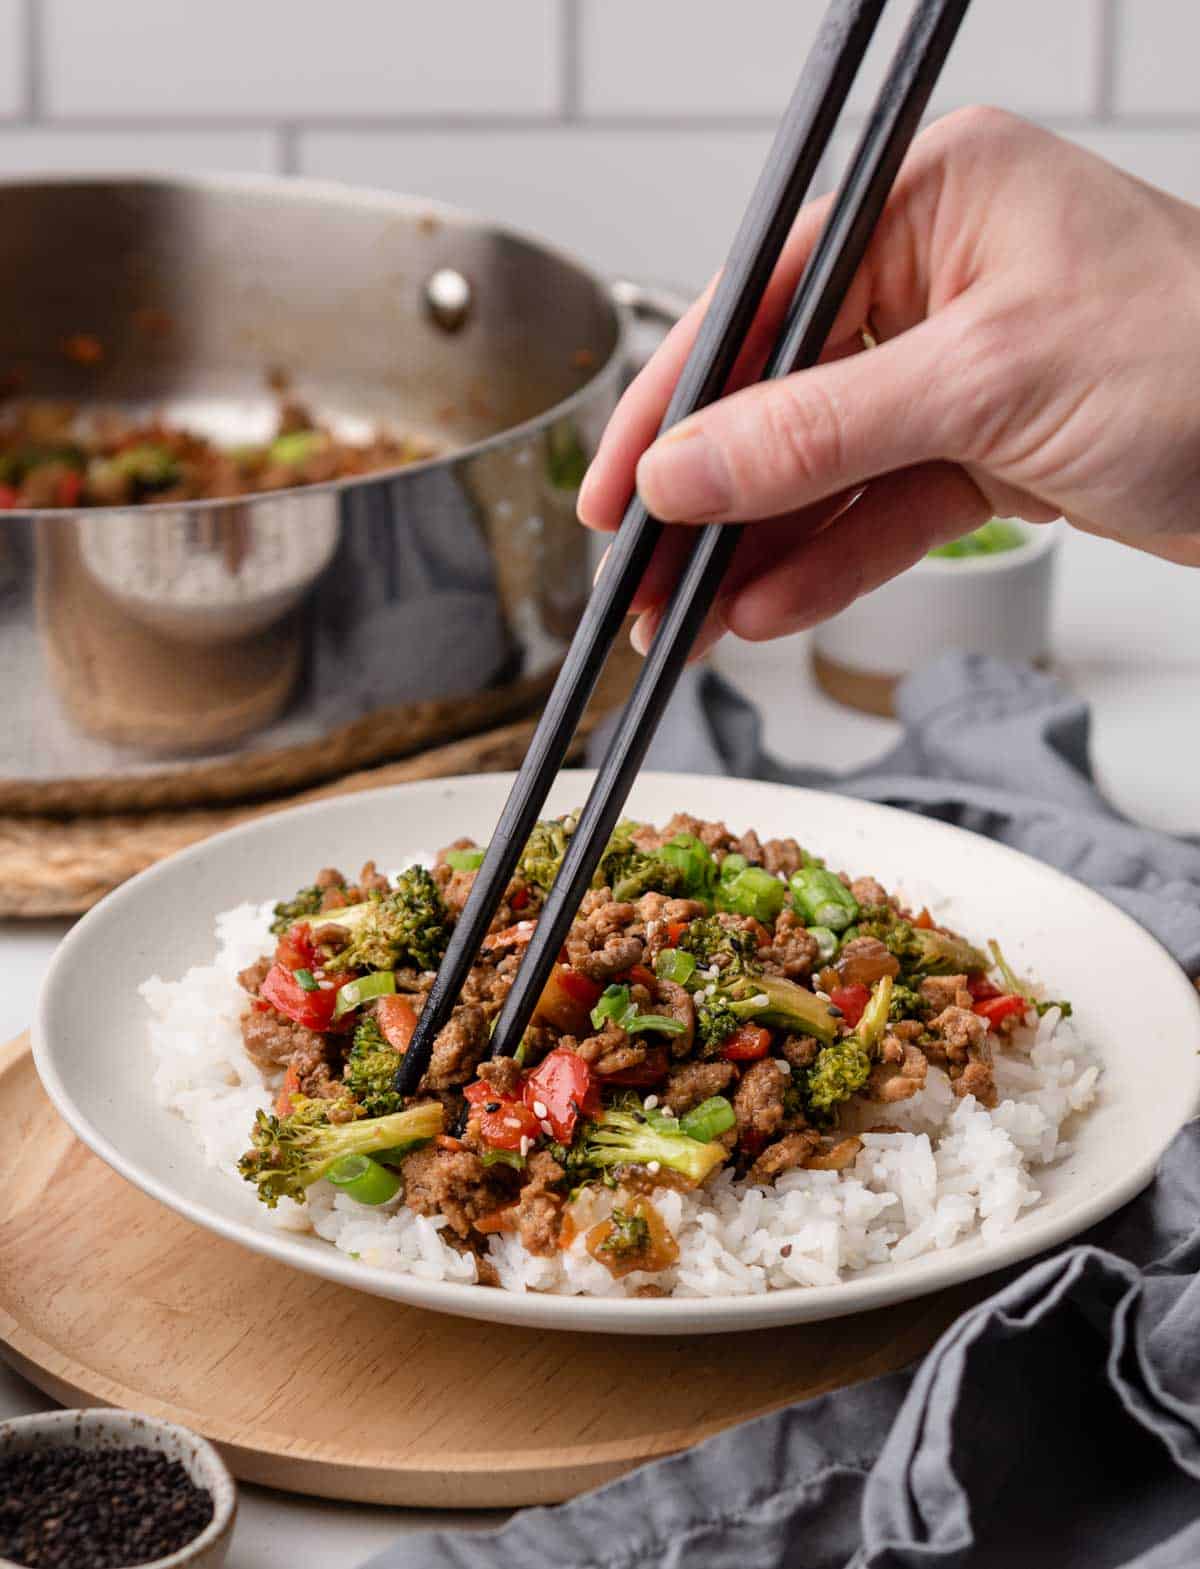 Hand using chopsticks to get a bite of stir fry from a plate